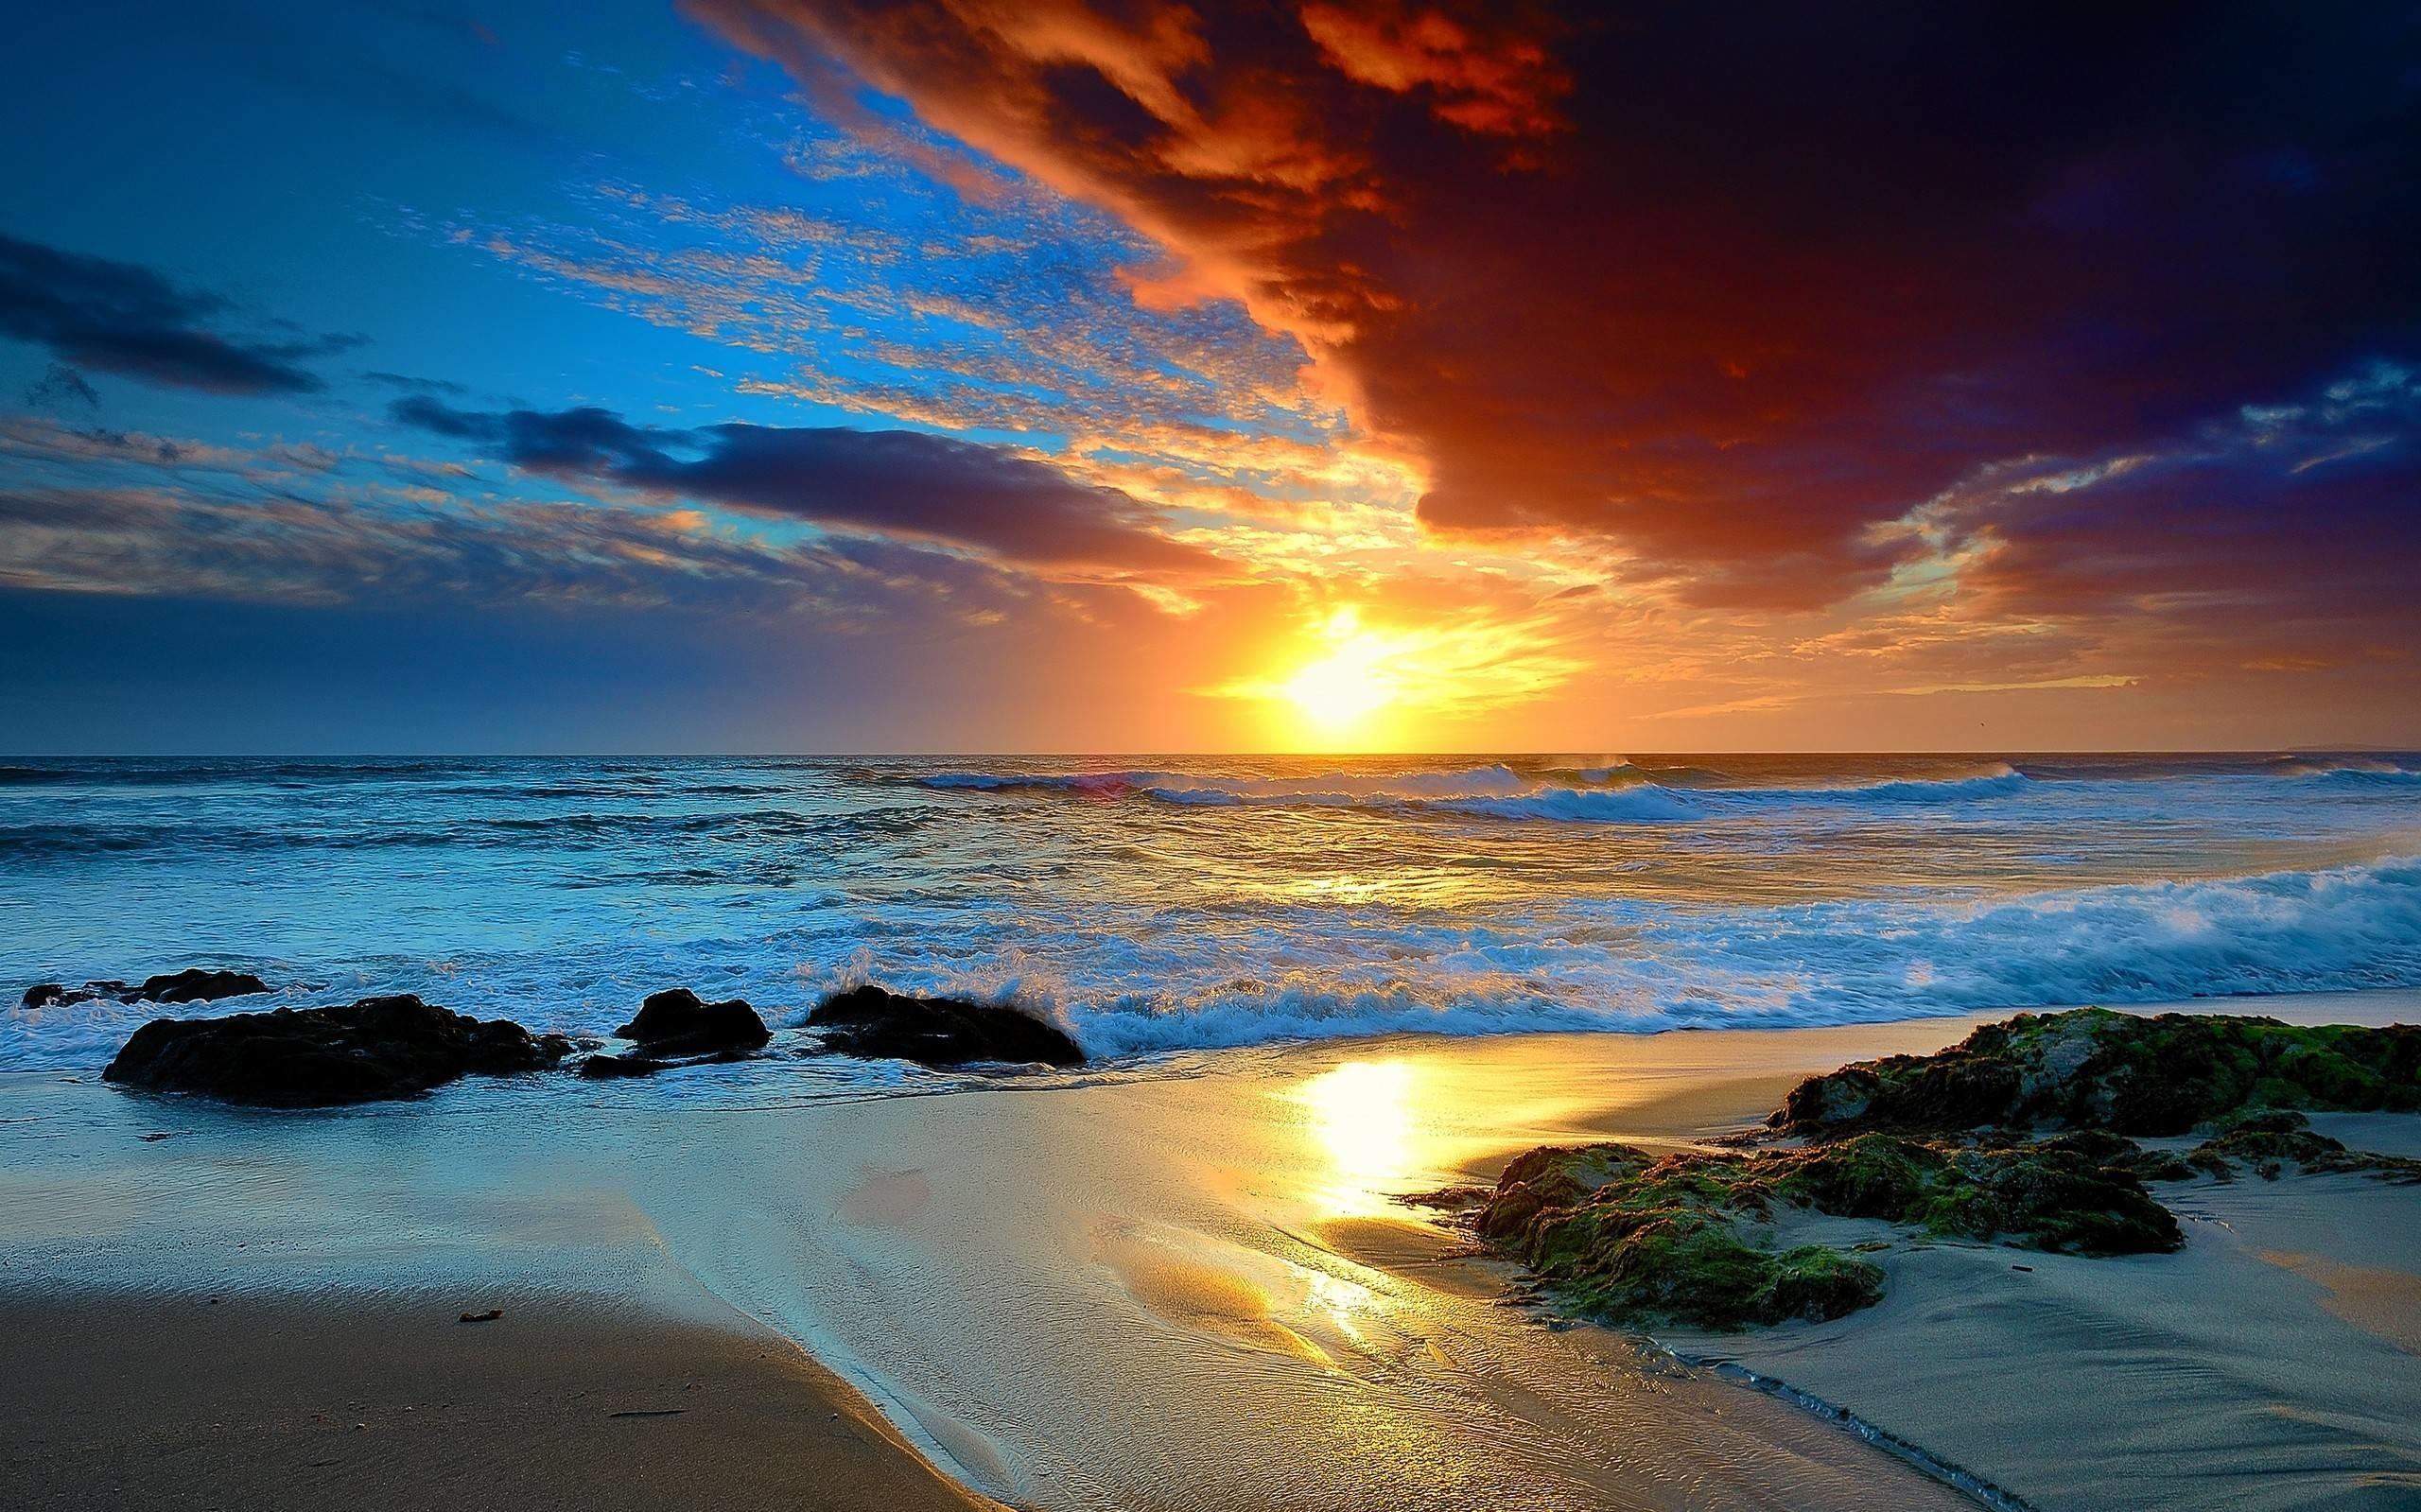 Beach Sunset Wallpaper The Best Image In